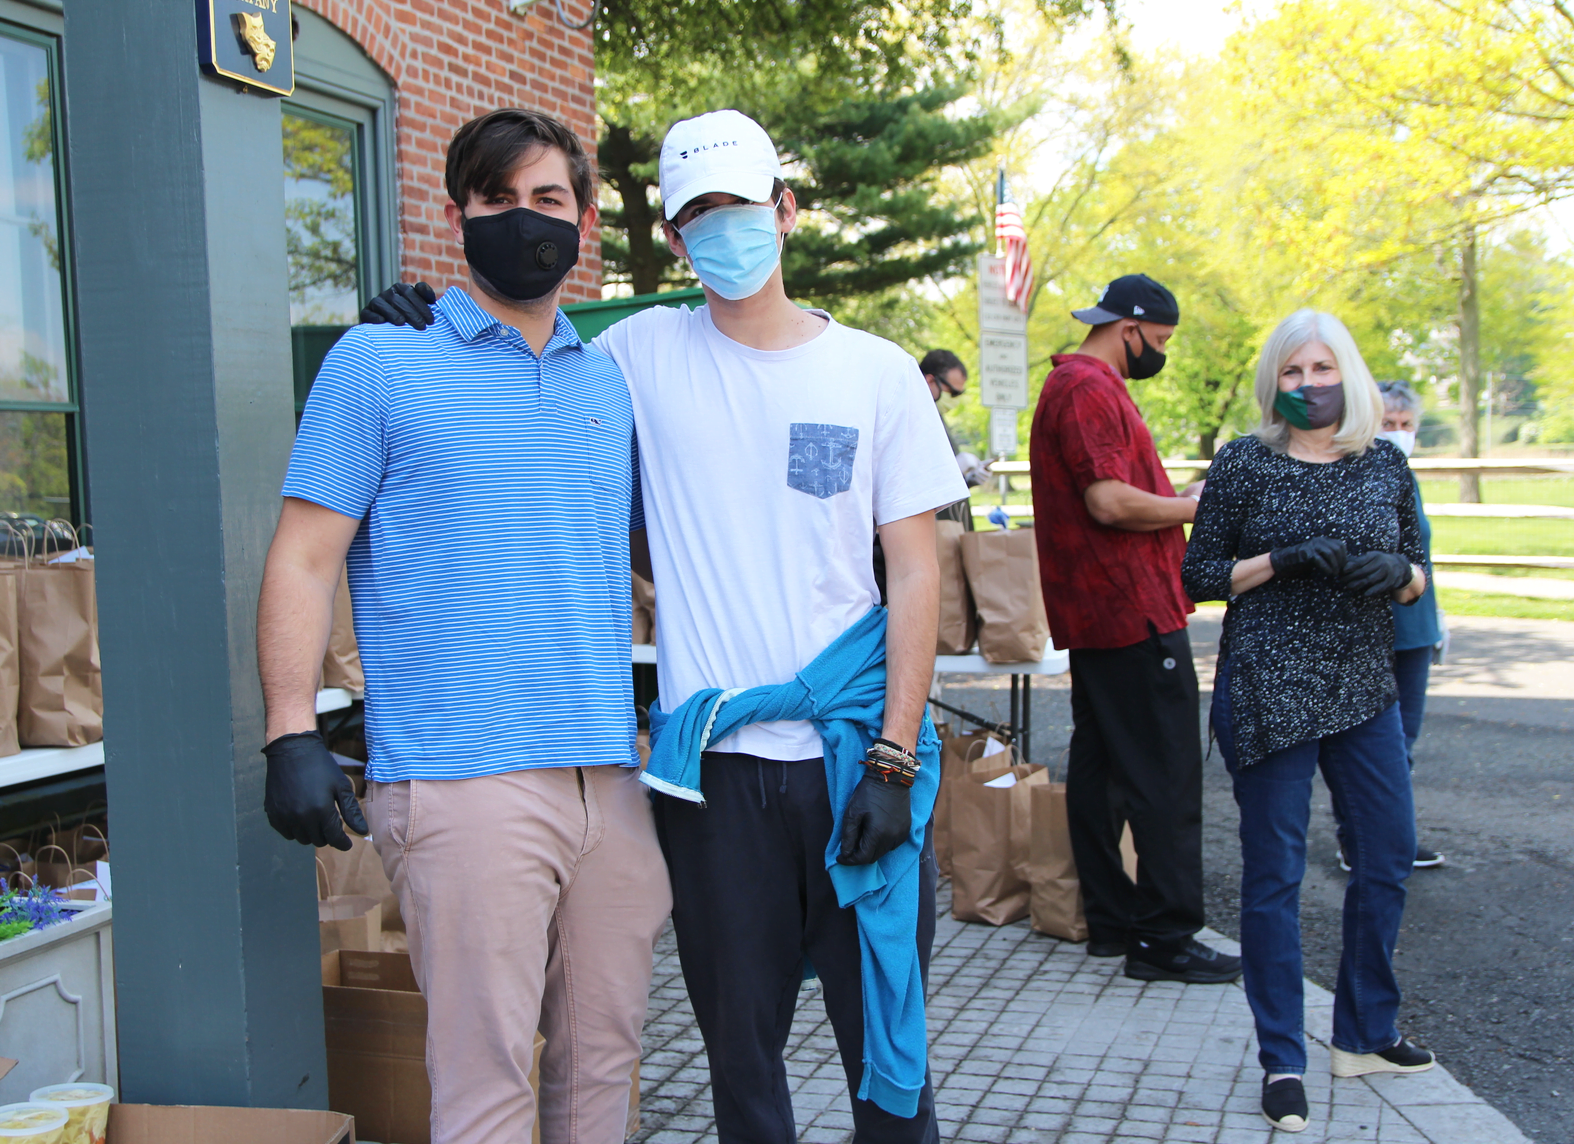 GCDS alumni Eric and Walty Toub volunteered to pack bags of groceries and put them in the cars of JFS volunteers, who in turn delivered them to homebound seniors. May 15, 2020 Photo: Leslie Yager